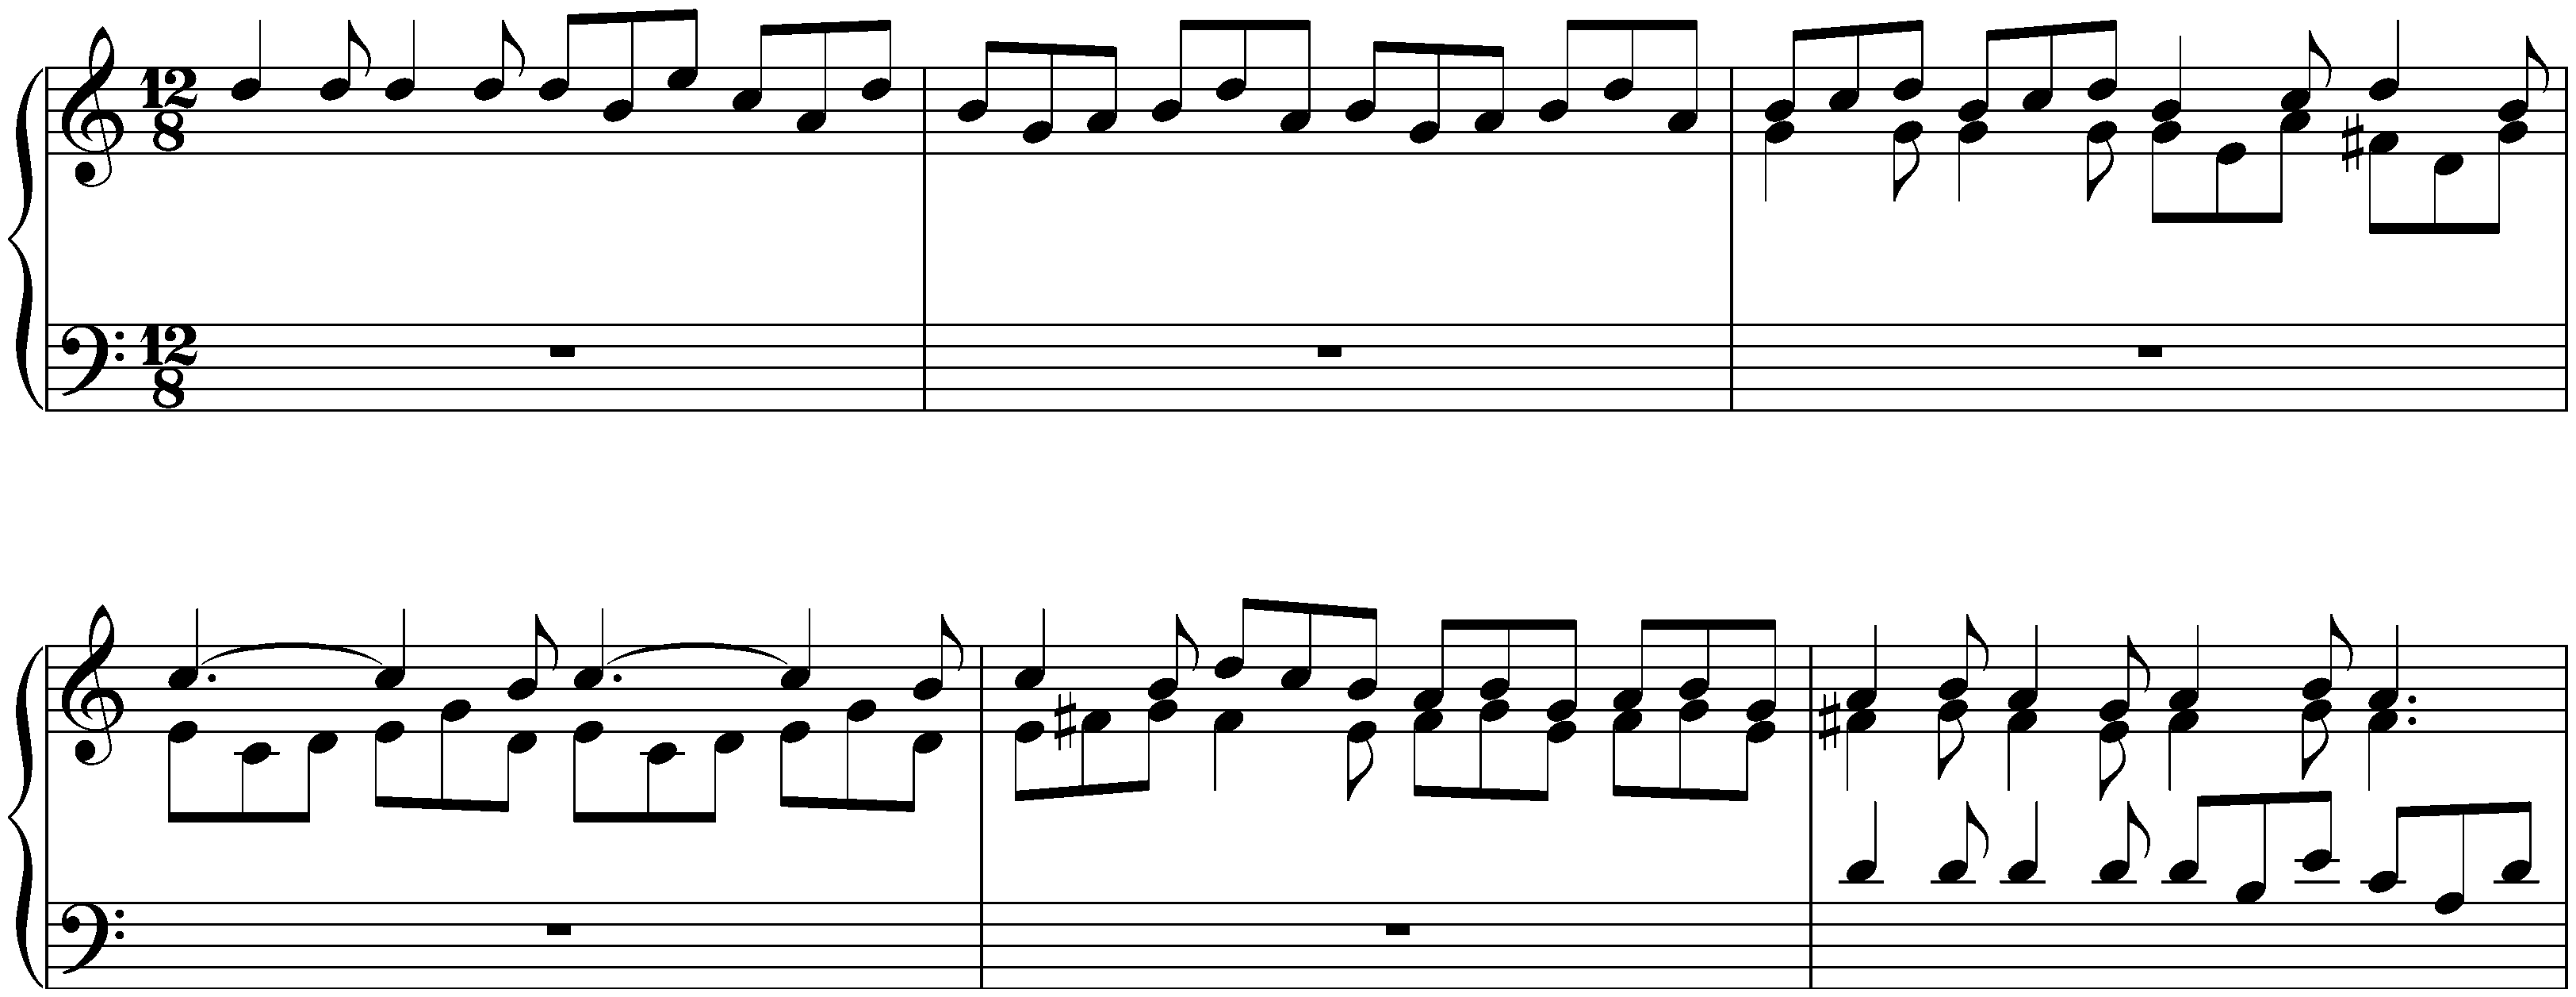 Gigue in G major, BWV Anh. 81